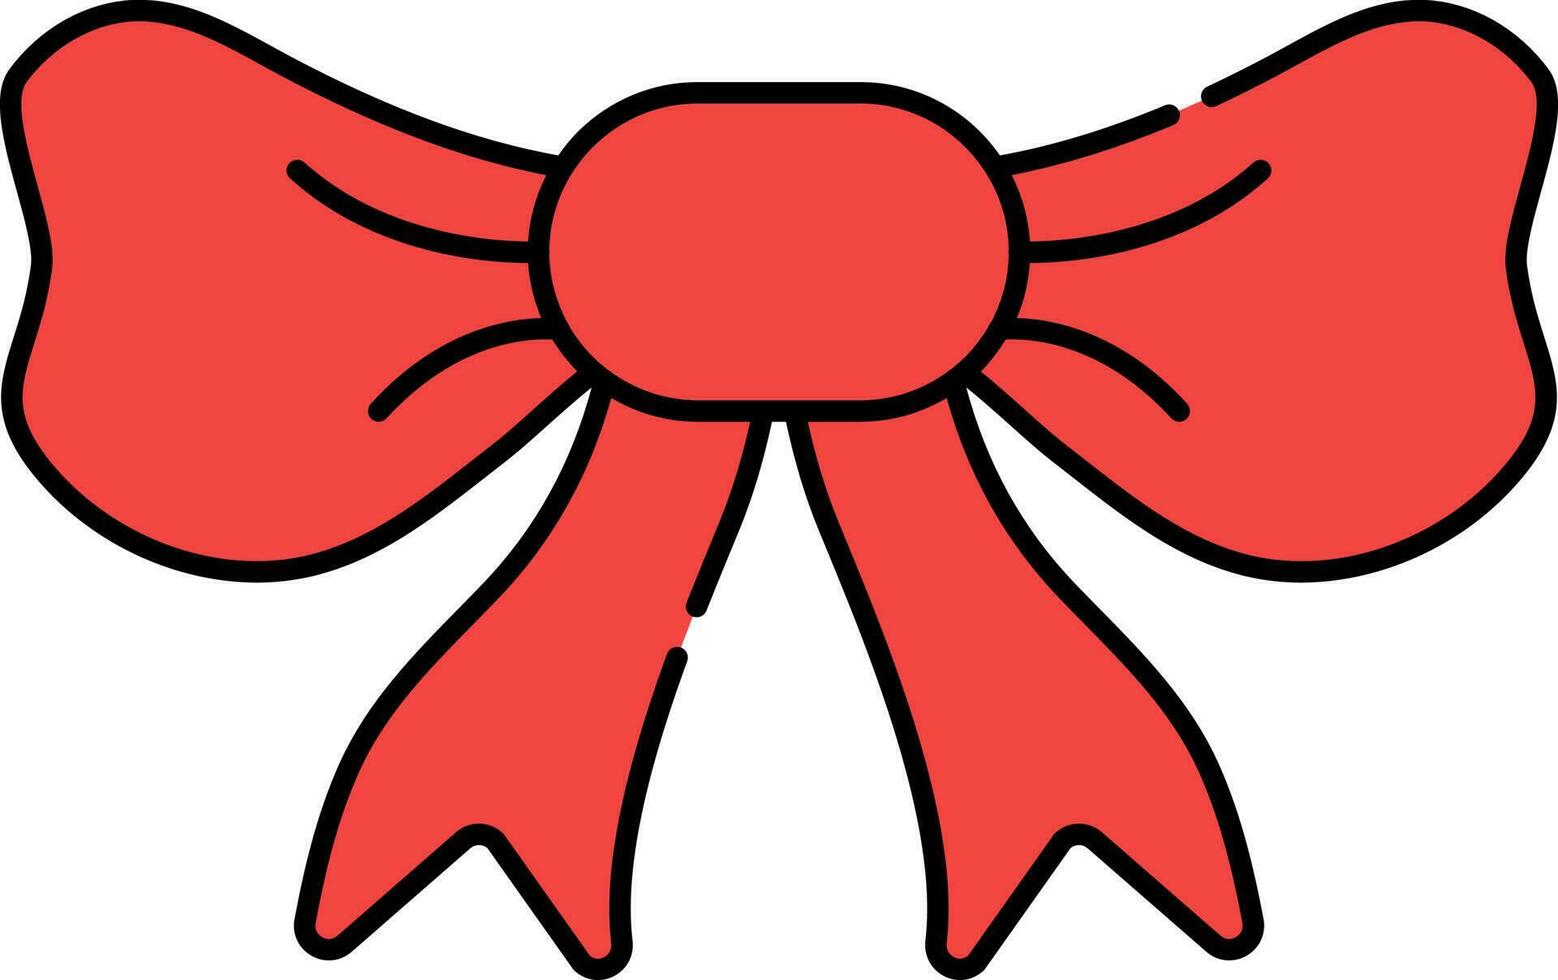 Red Bow Ribbon Icon In Flat Style. vector